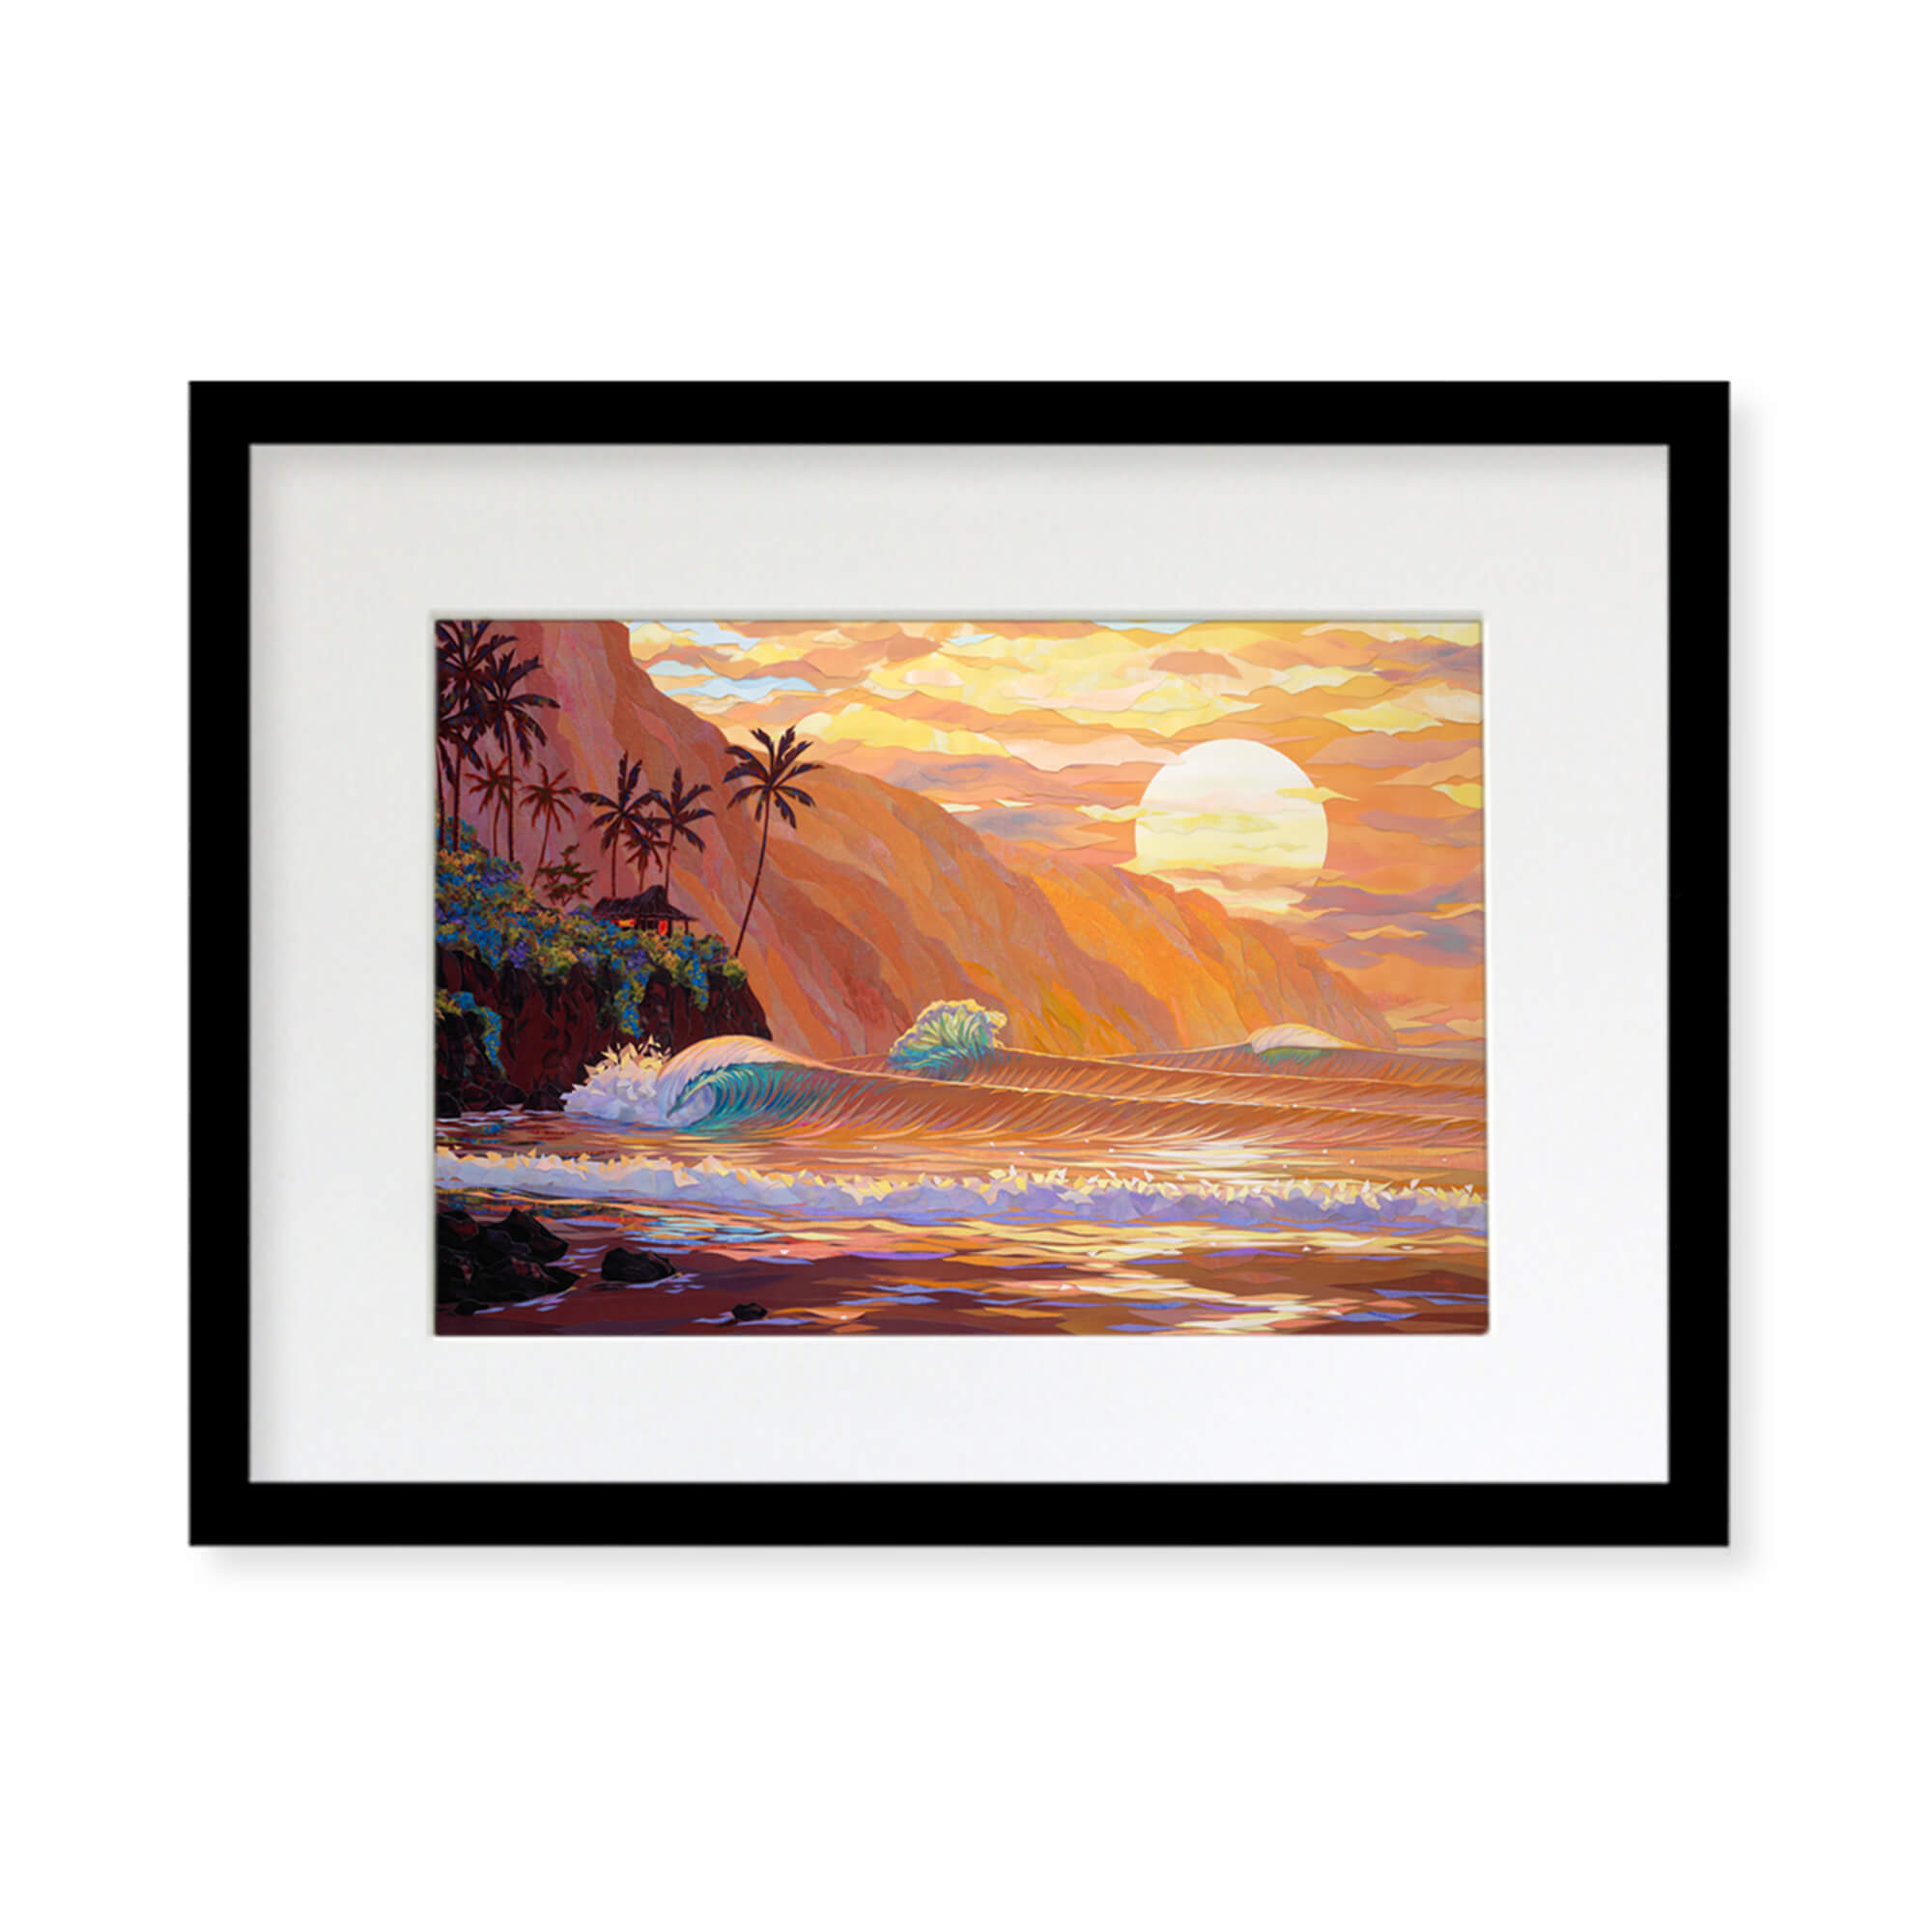 A framed matted art print featuring a collage of a sunset view of the ocean as seen from a tropical beach in Hawaii by Hawaii artist Patrick Parker